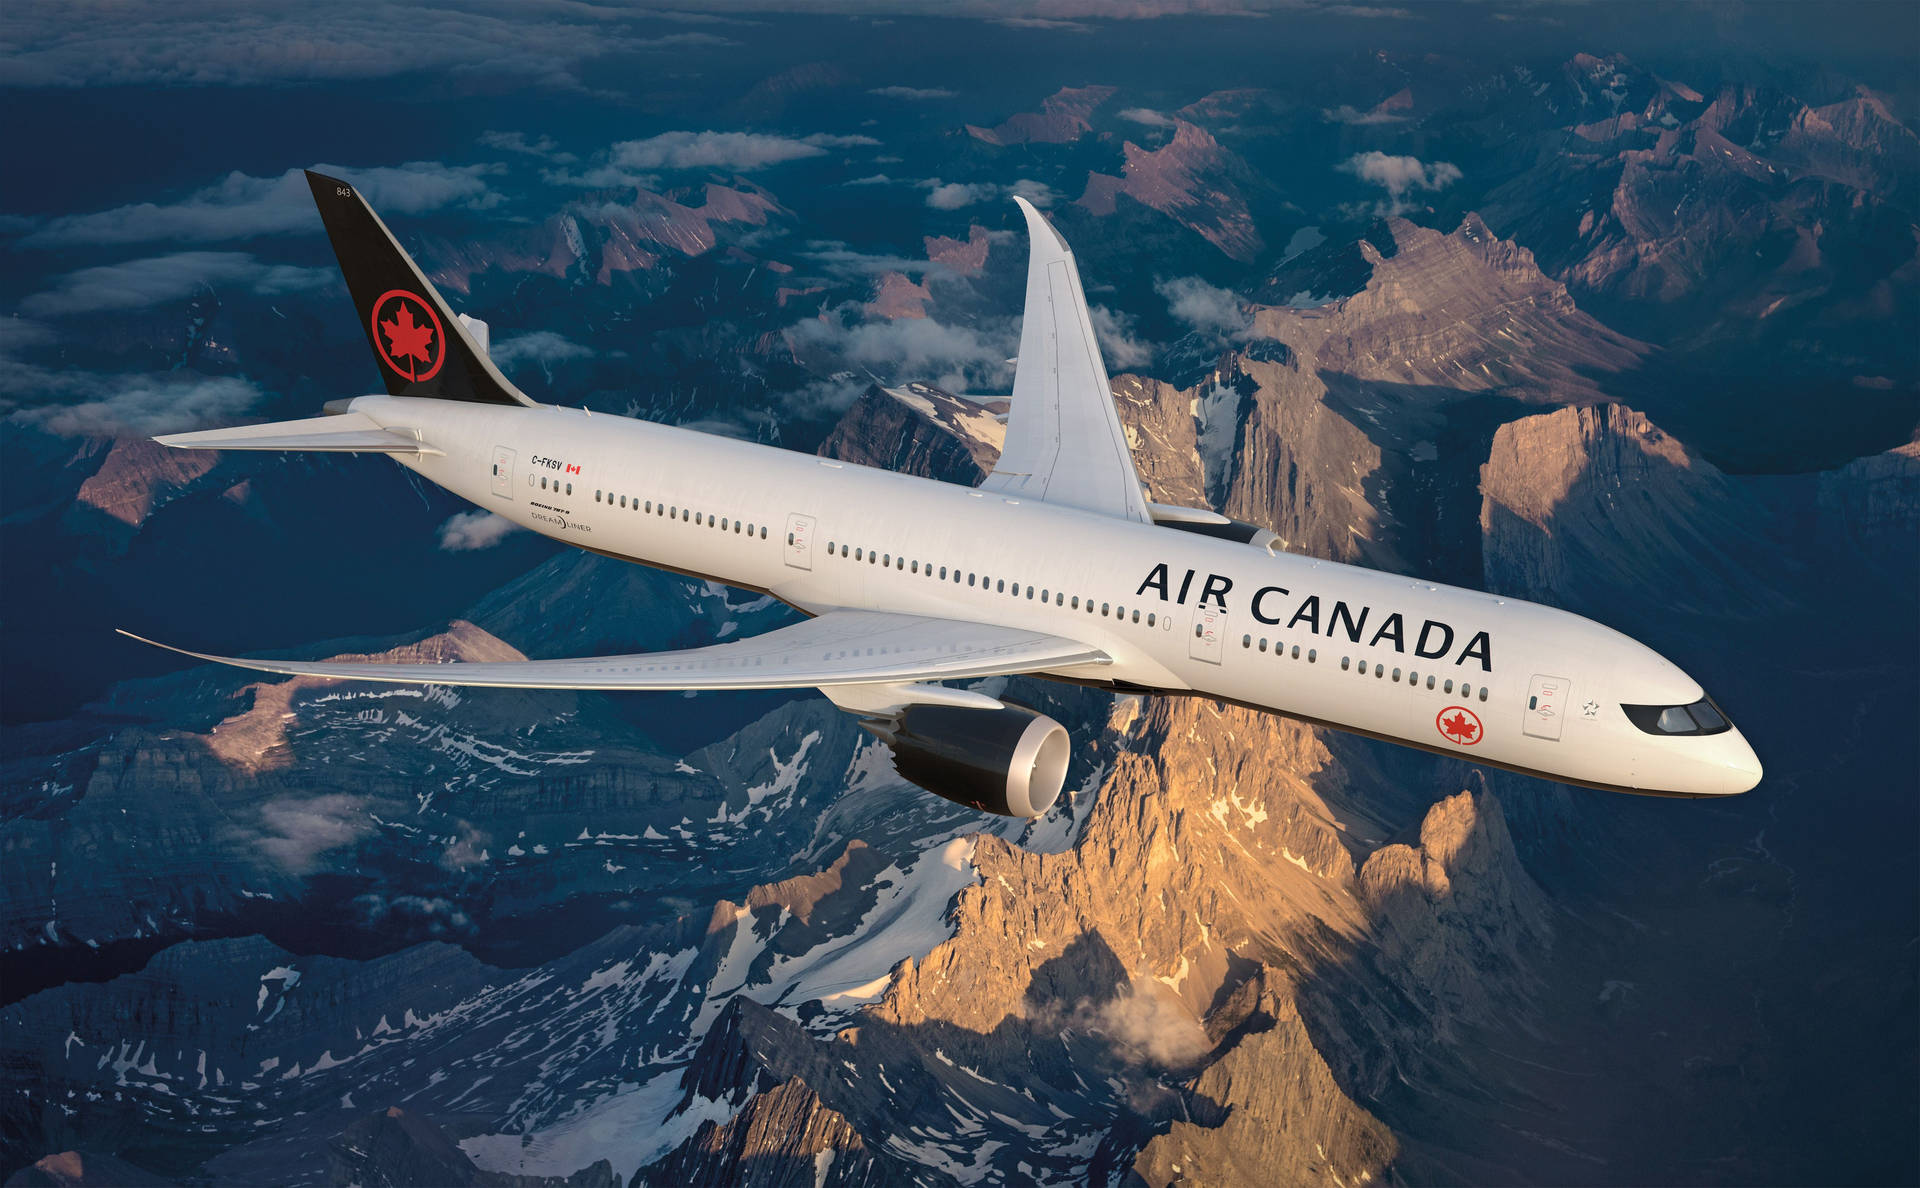 Air Canada over bjerge Wallpaper